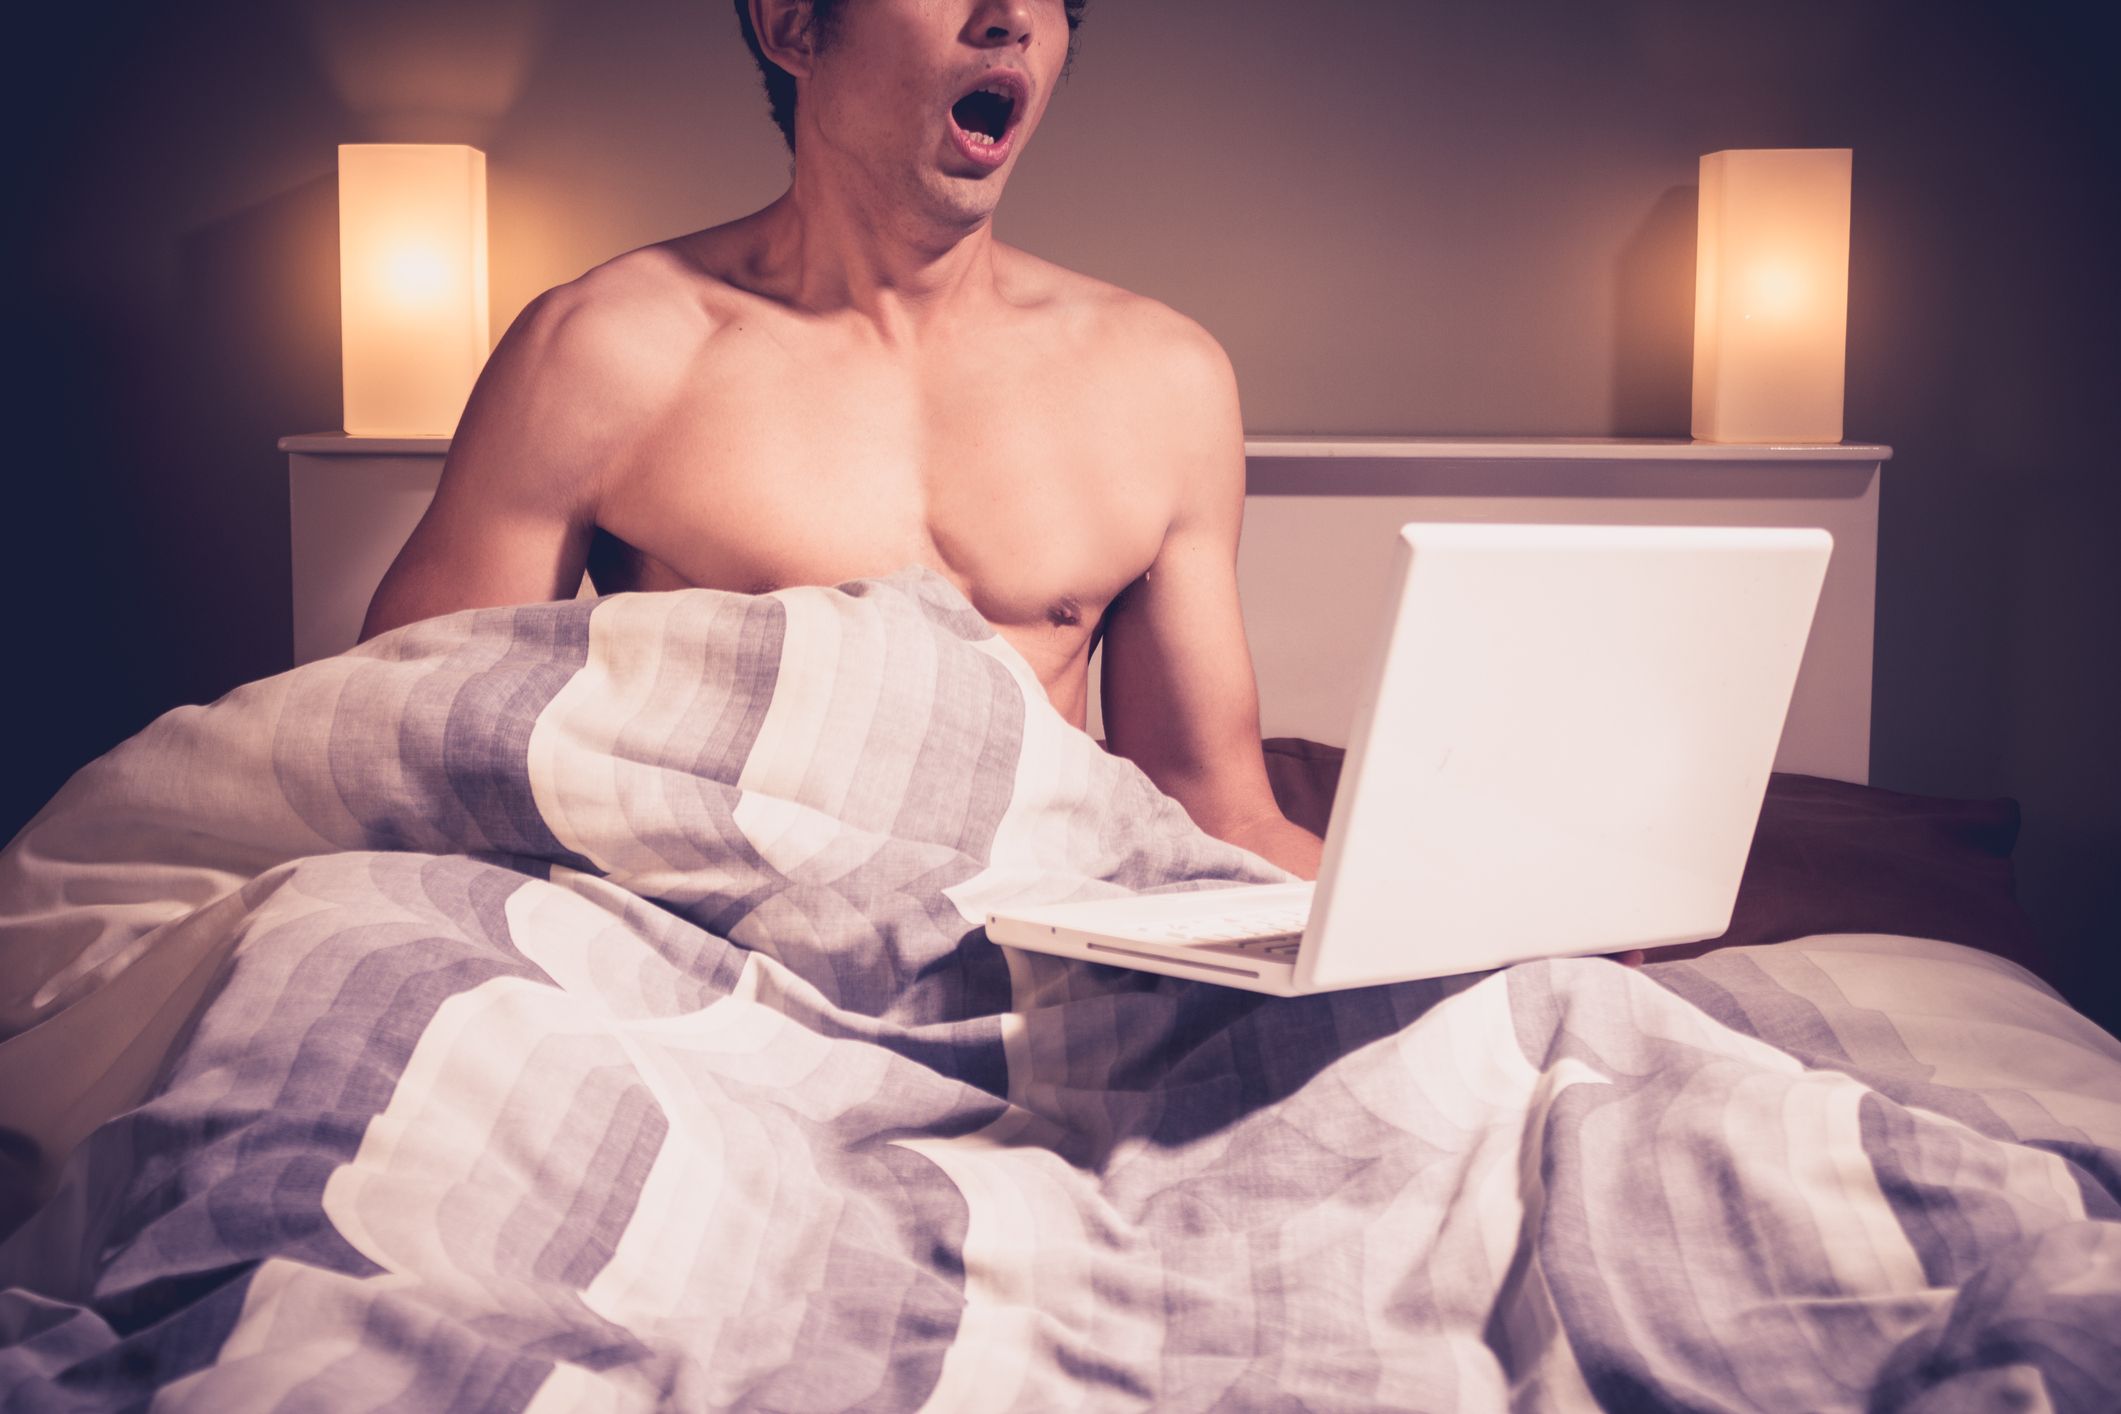 What Is Porn-Induced Erectile Dysfunction - Effects of Watching Pornography